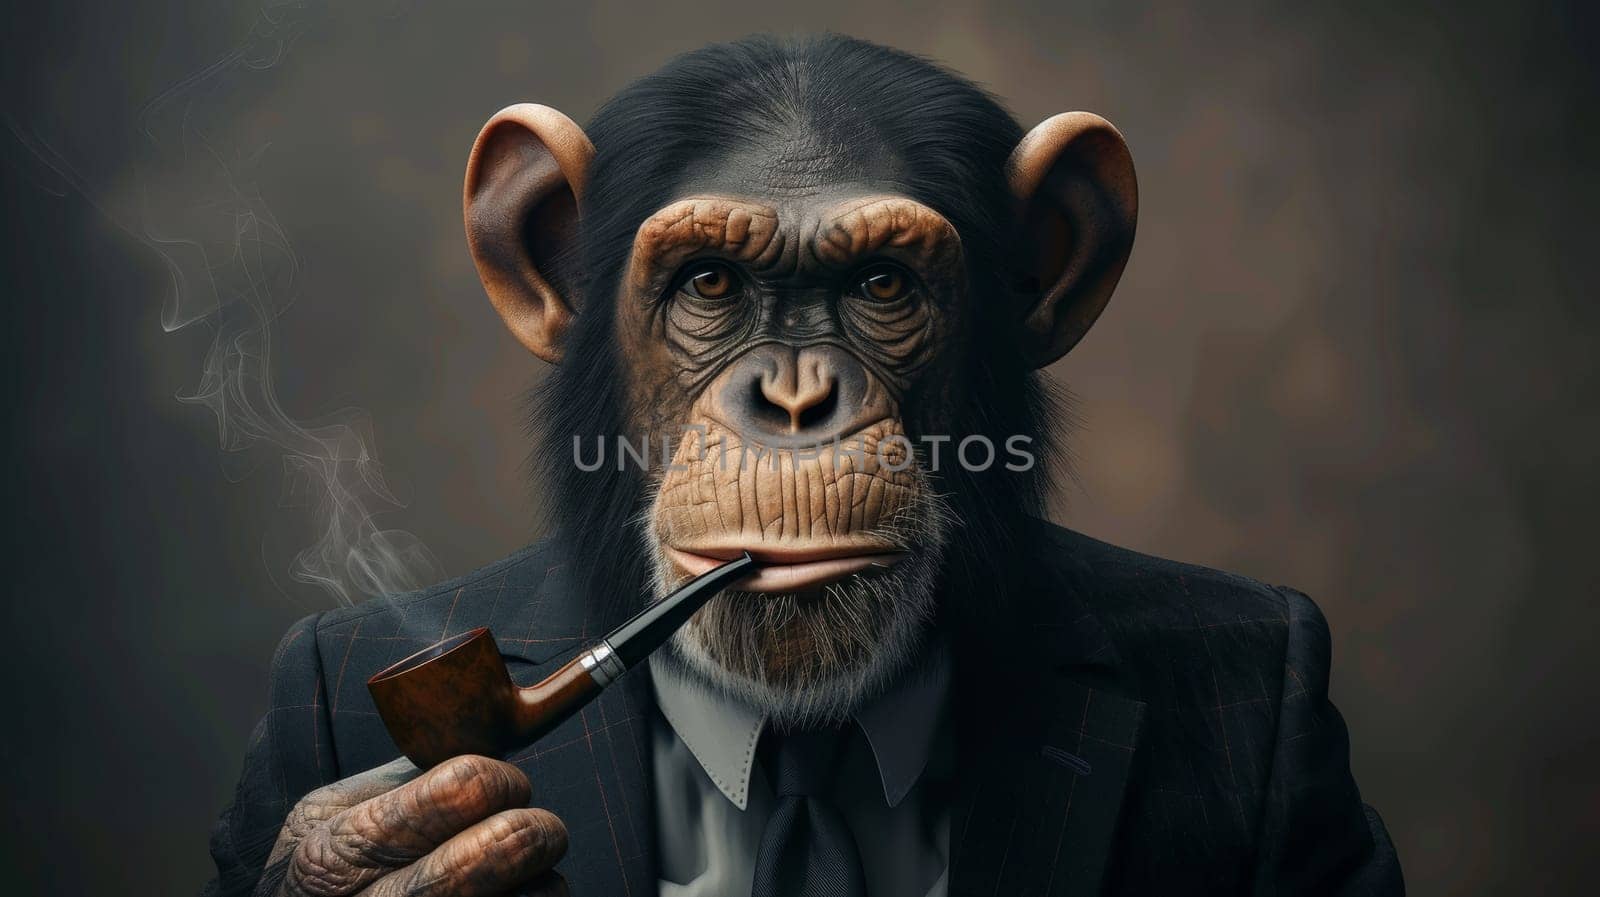 A monkey with a suit and tie smoking a pipe